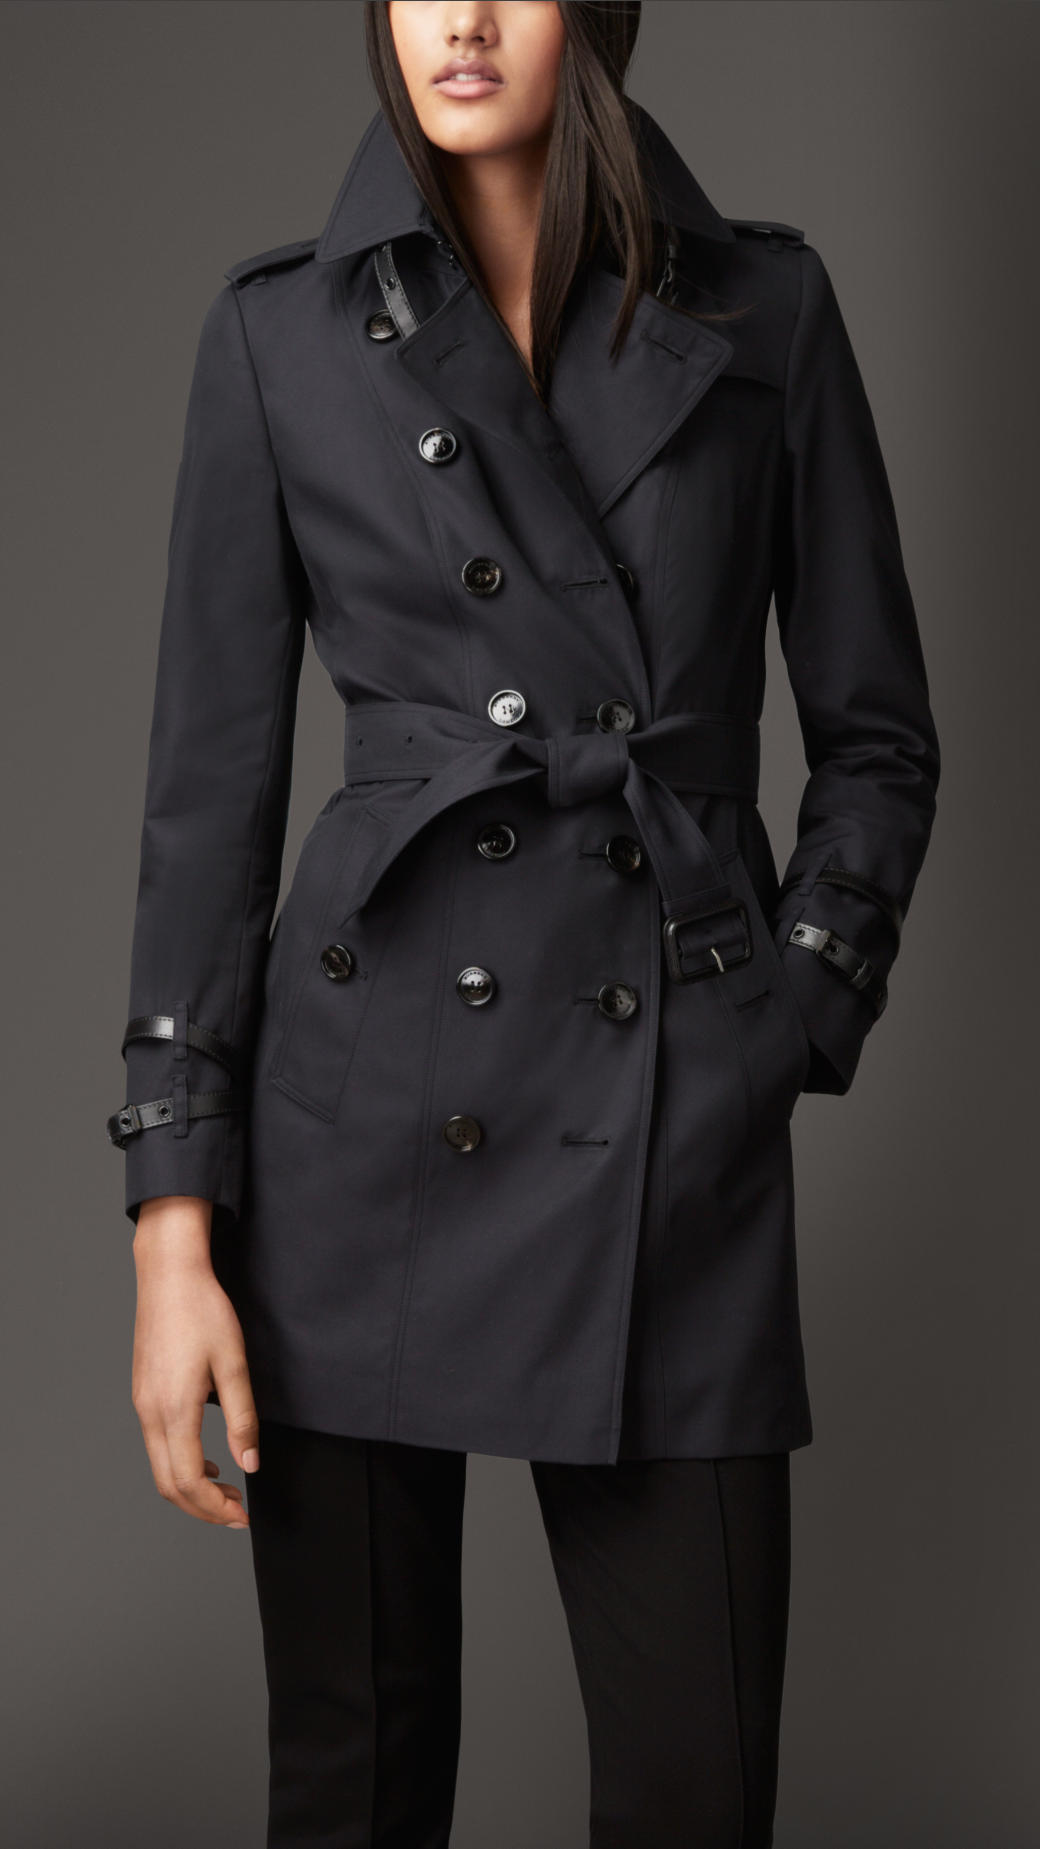 burberry navy trench Online Shopping for Women, Men, Kids Fashion &  Lifestyle|Free Delivery & Returns! -